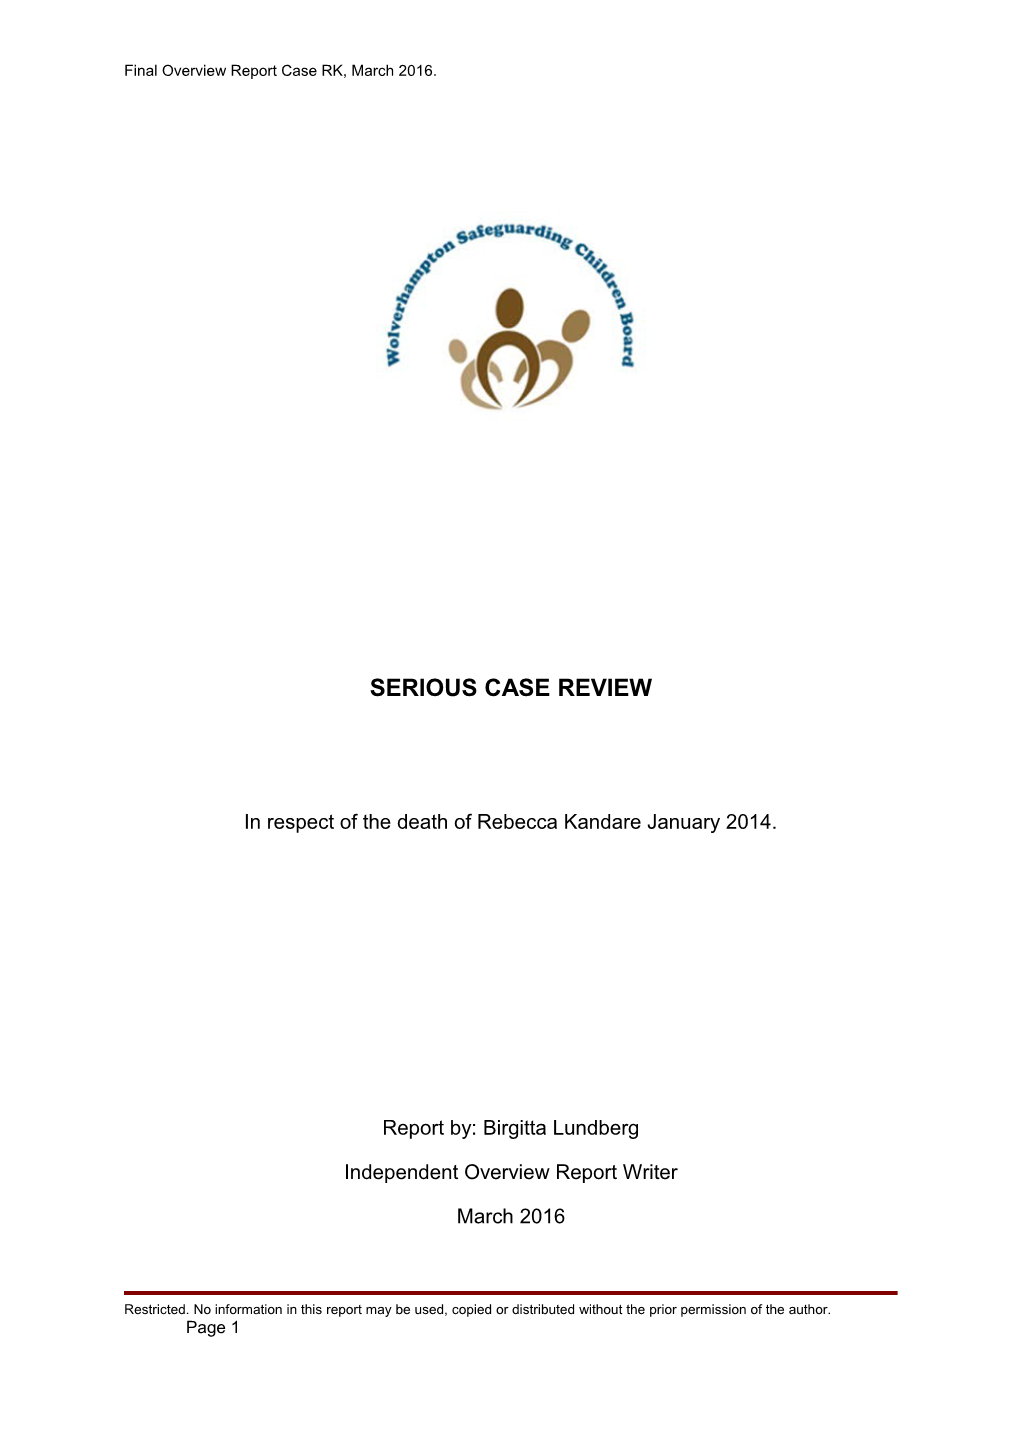 Final Overview Report Case RK, March 2016